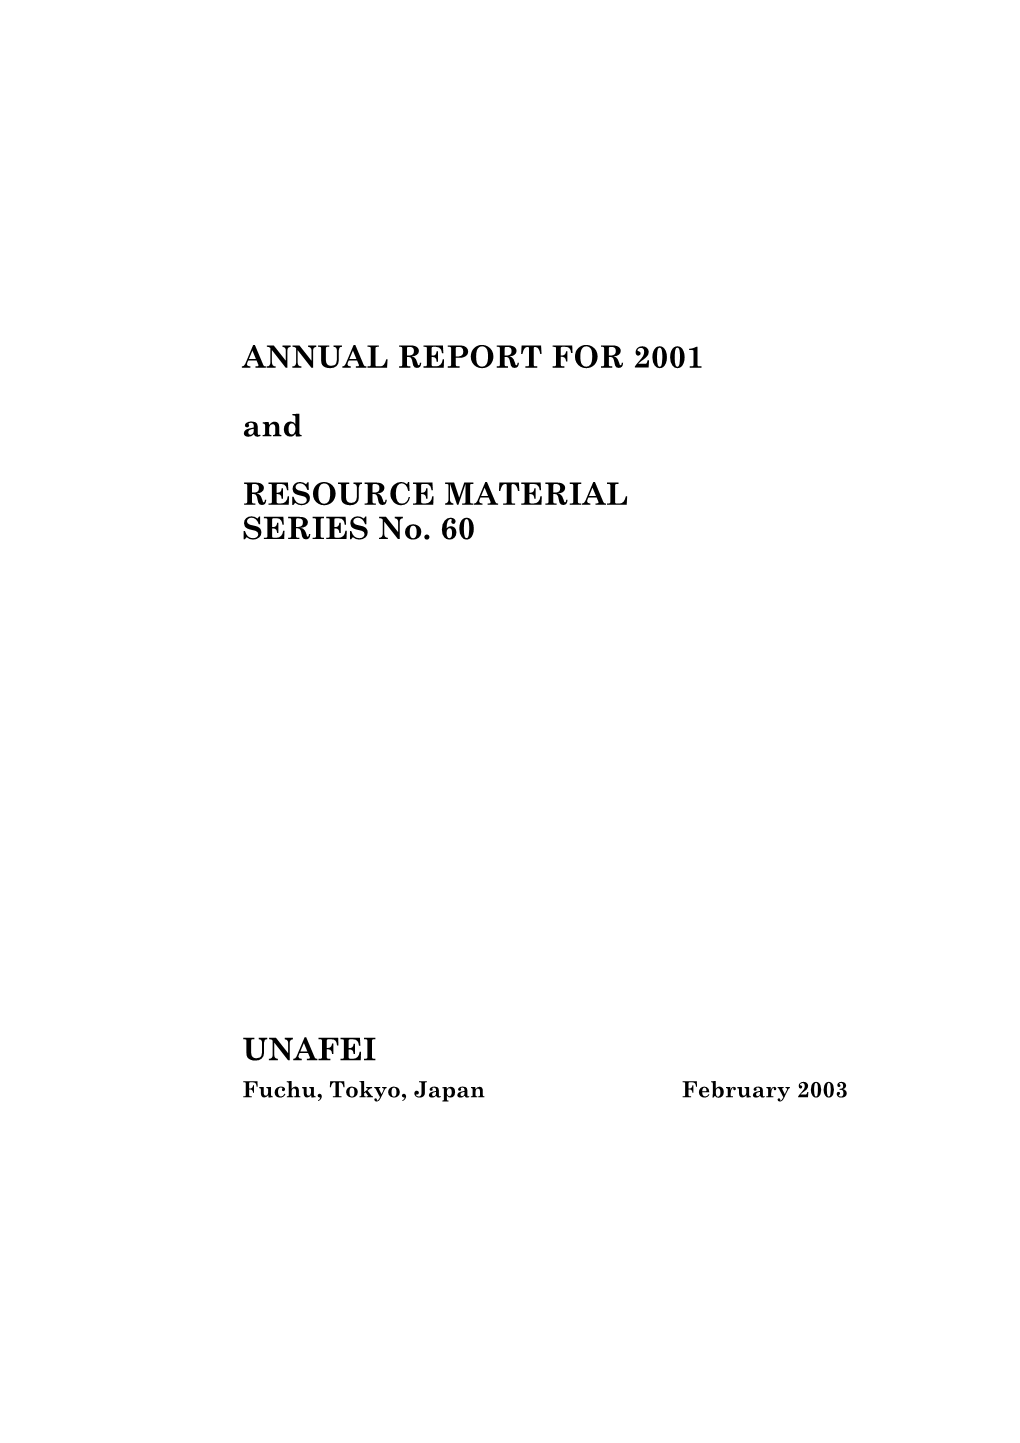 ANNUAL REPORT for 2001 and RESOURCE MATERIAL SERIES